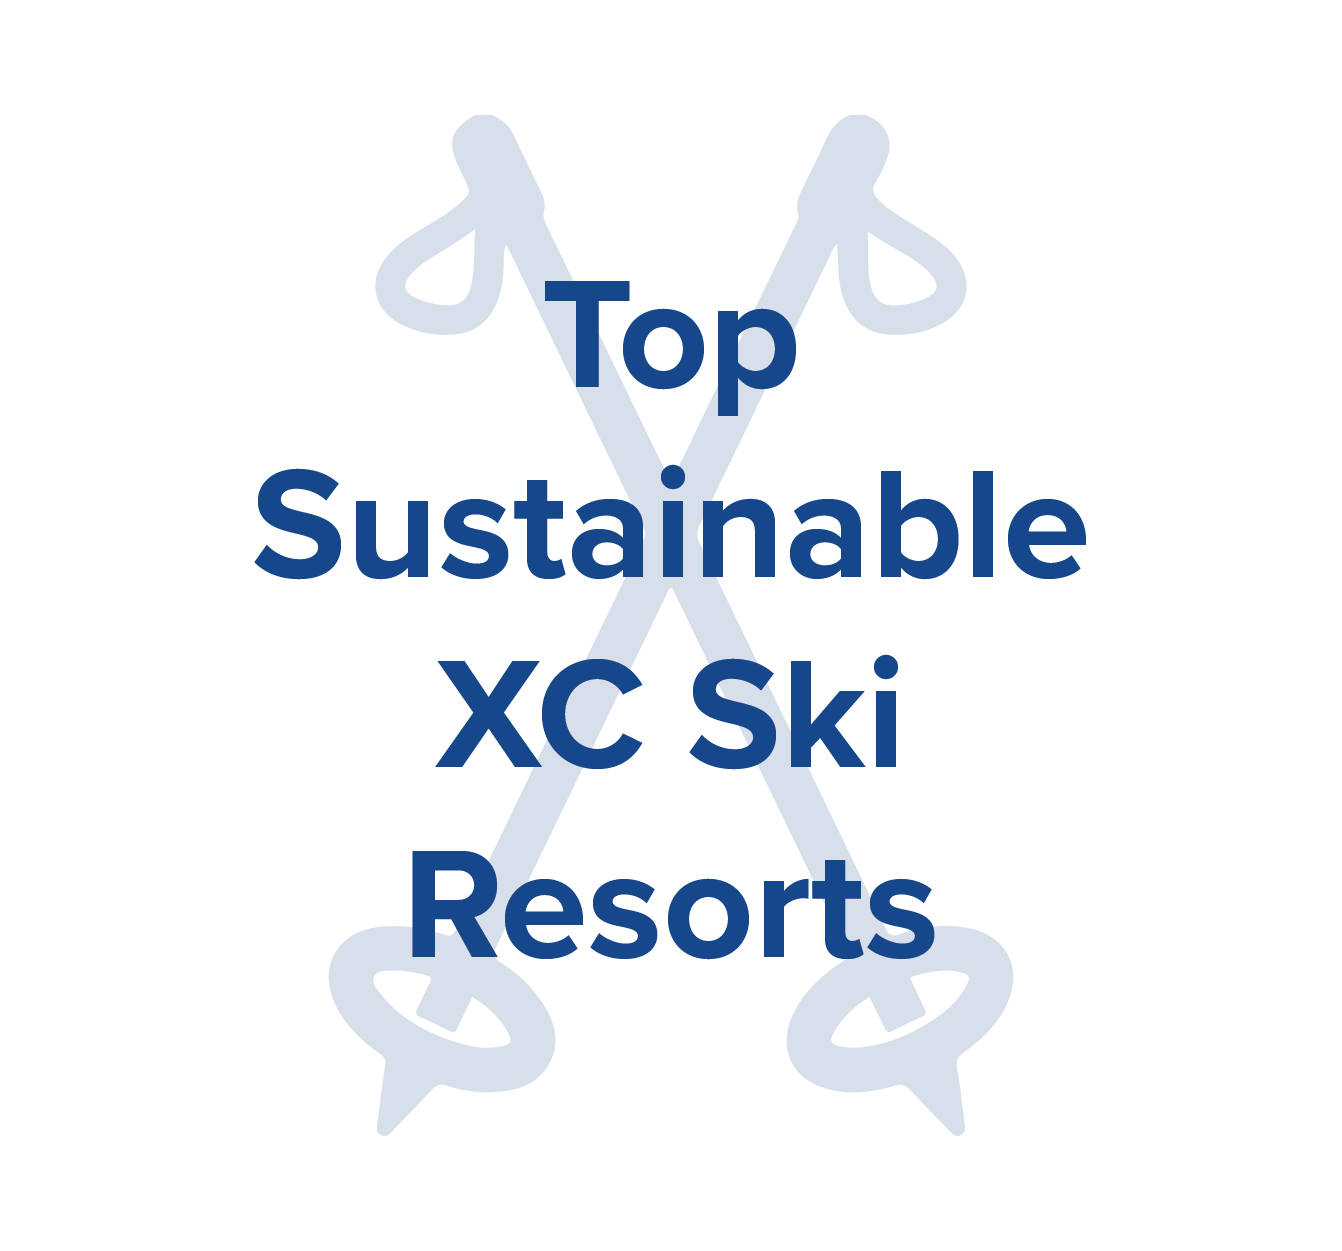 top sustainable xc ski resorts.png